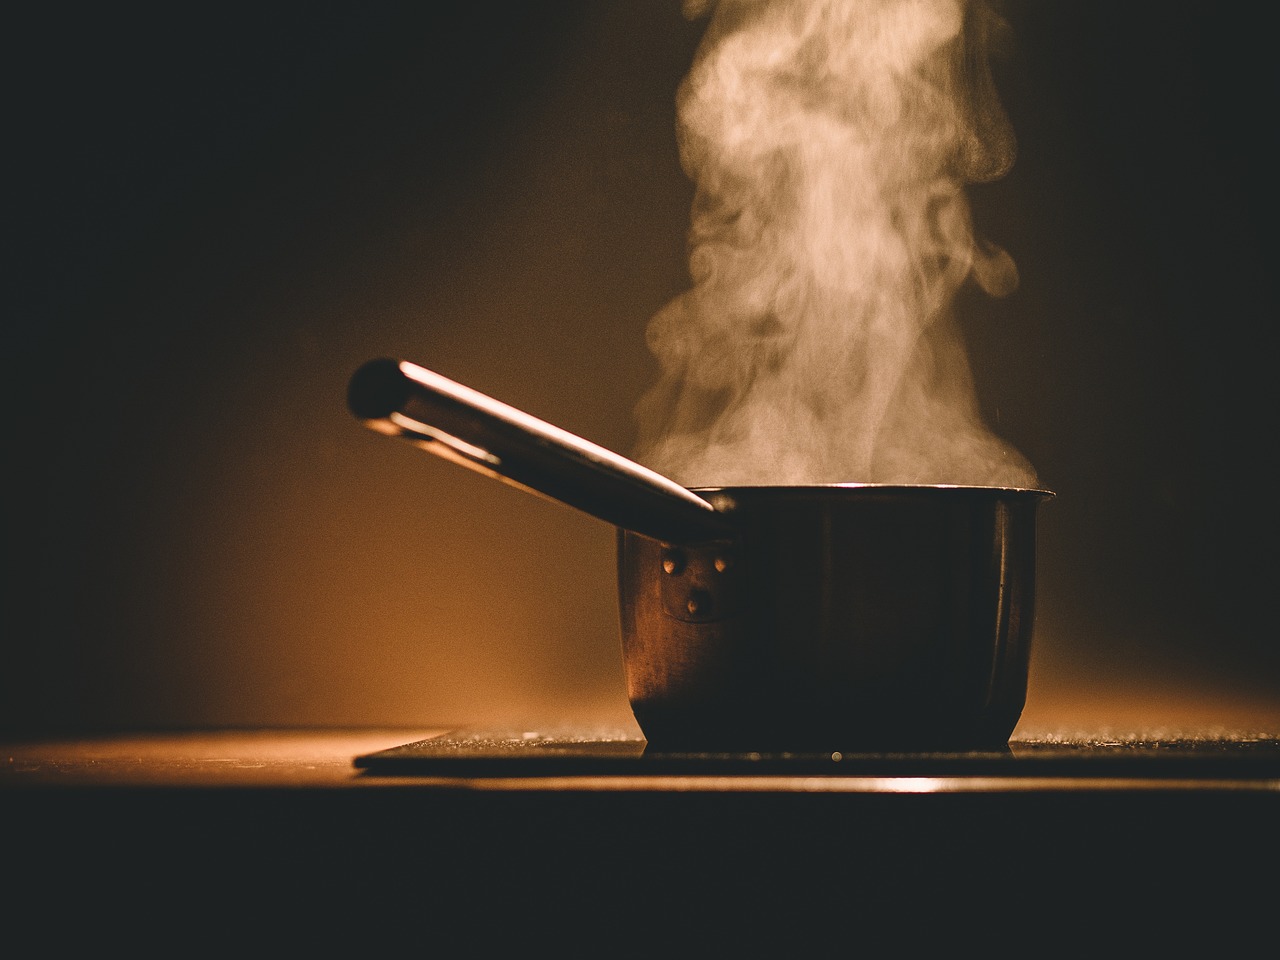 A single pot on a cooking surface with steam coming from it